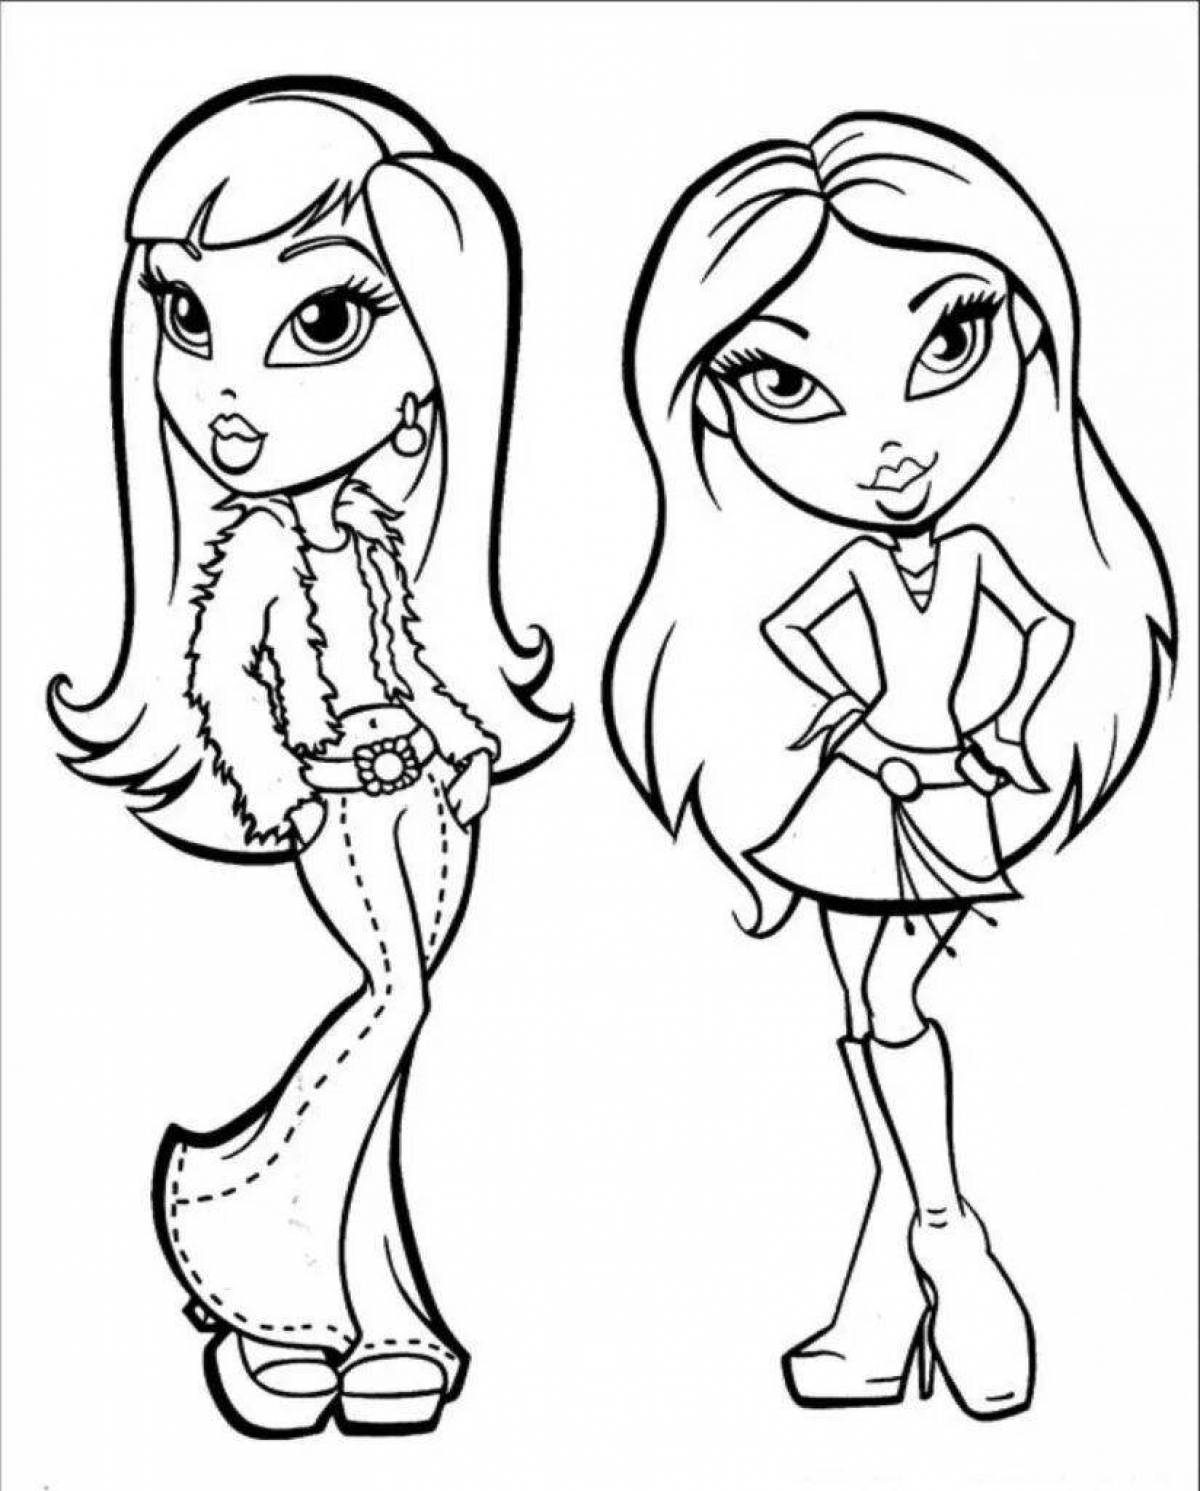 Amazing coloring book for girls redraw